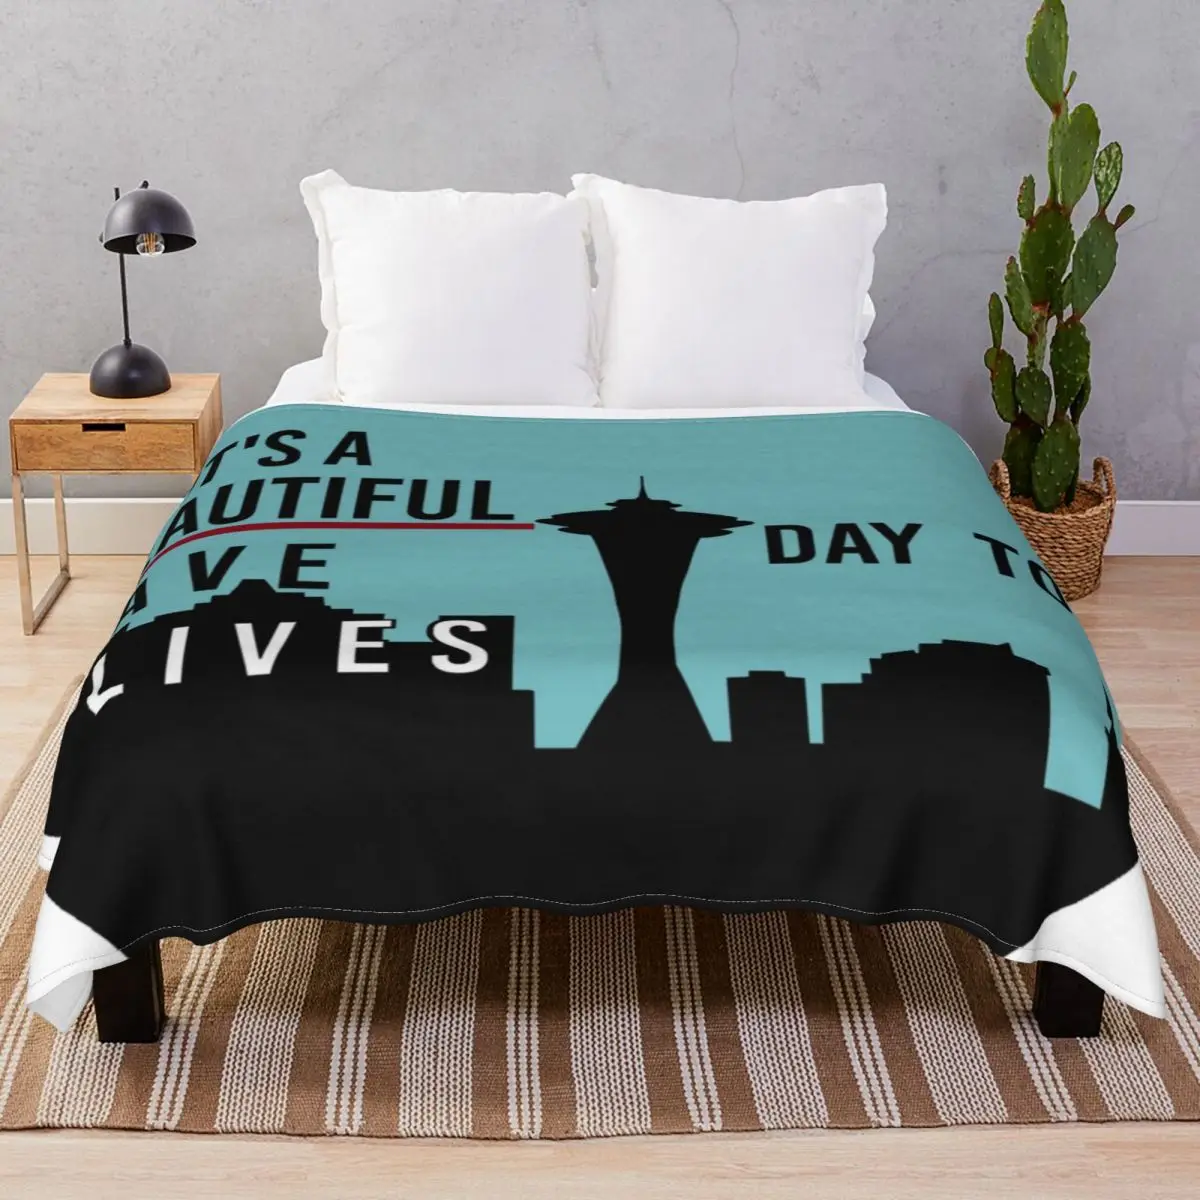 It's A Beautiful Day Blanket Flannel Textile Decor Comfortable Throw Blankets for Bedding Sofa Travel Cinema